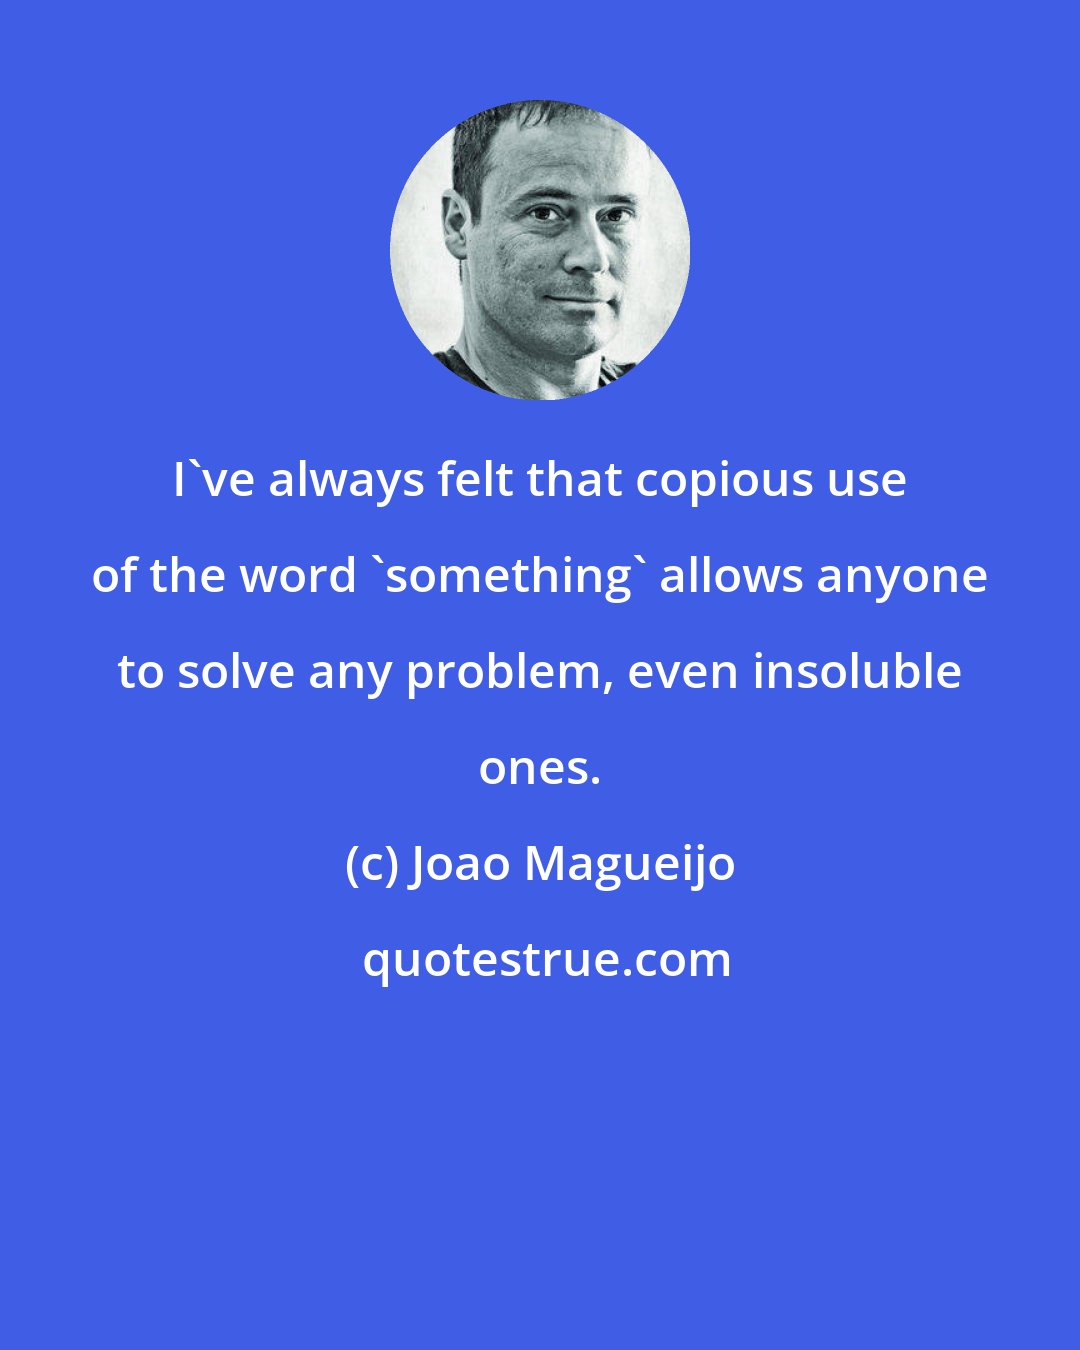 Joao Magueijo: I've always felt that copious use of the word 'something' allows anyone to solve any problem, even insoluble ones.